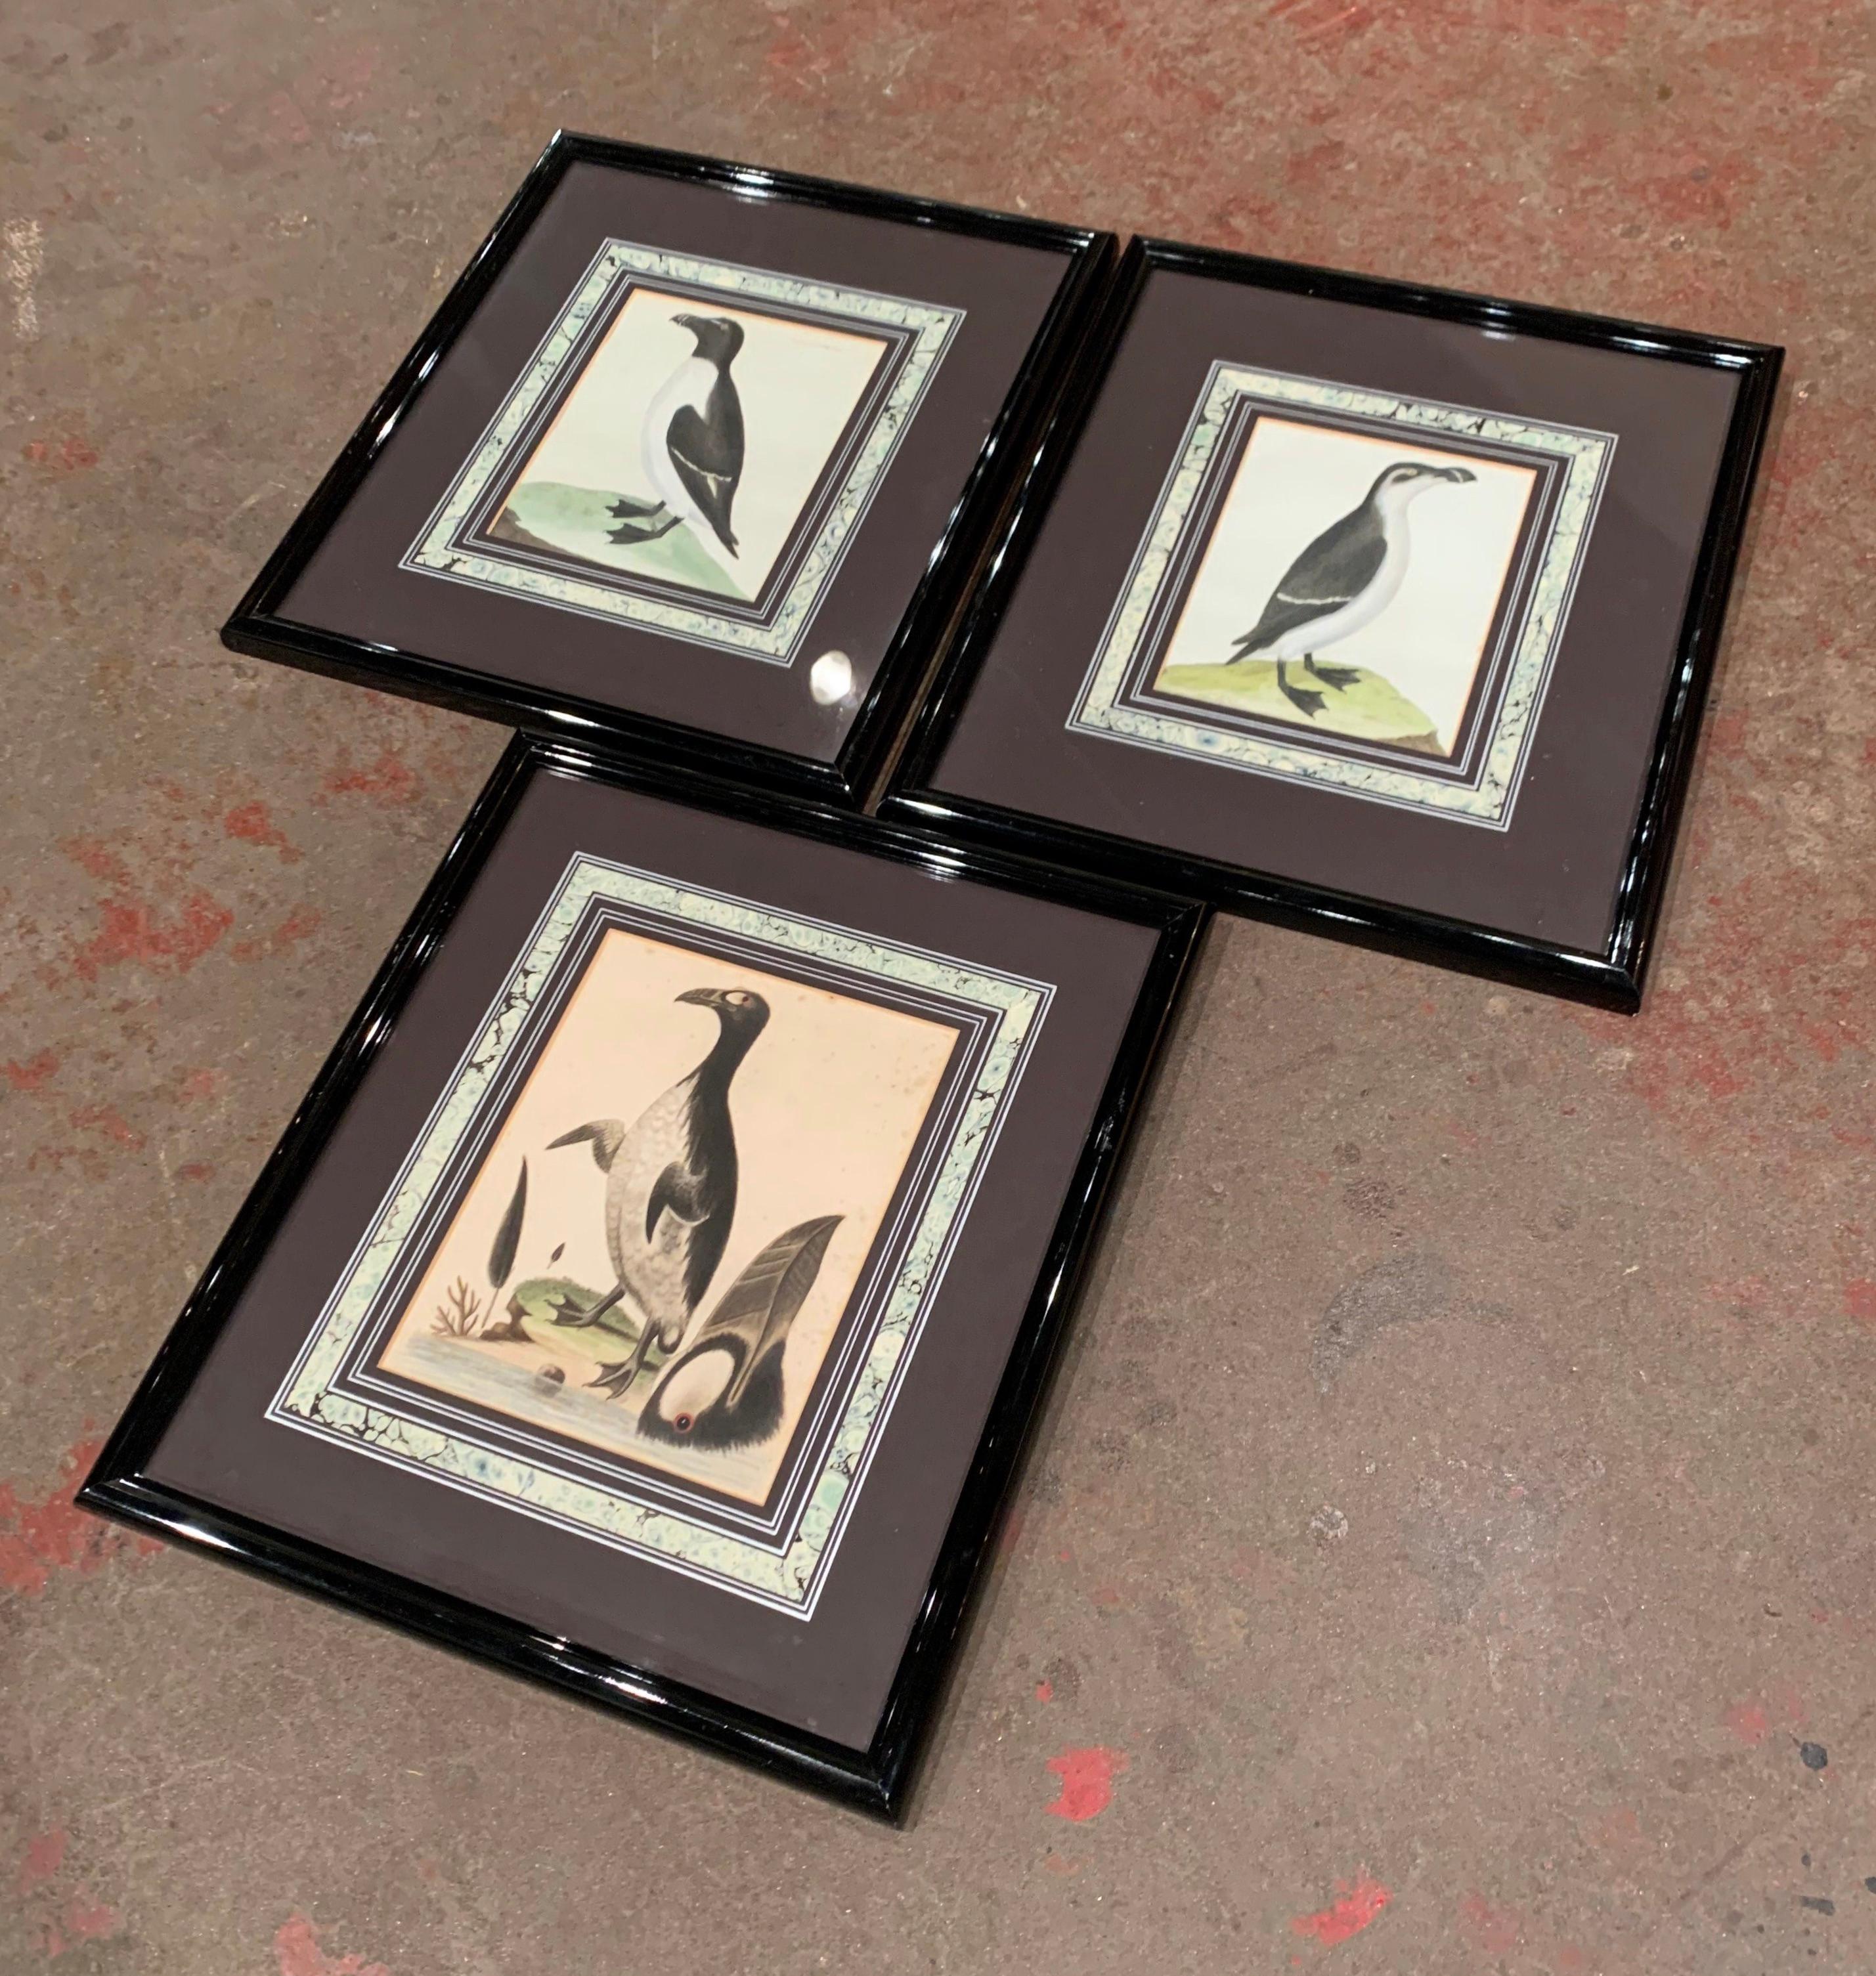 Decorate a wall with this colorful suite of bird watercolors from England. Set in a black acrylic frame and protected with glass, all three hand painted antique watercolors depict a rare bird. The art works are in excellent condition.
Measures: